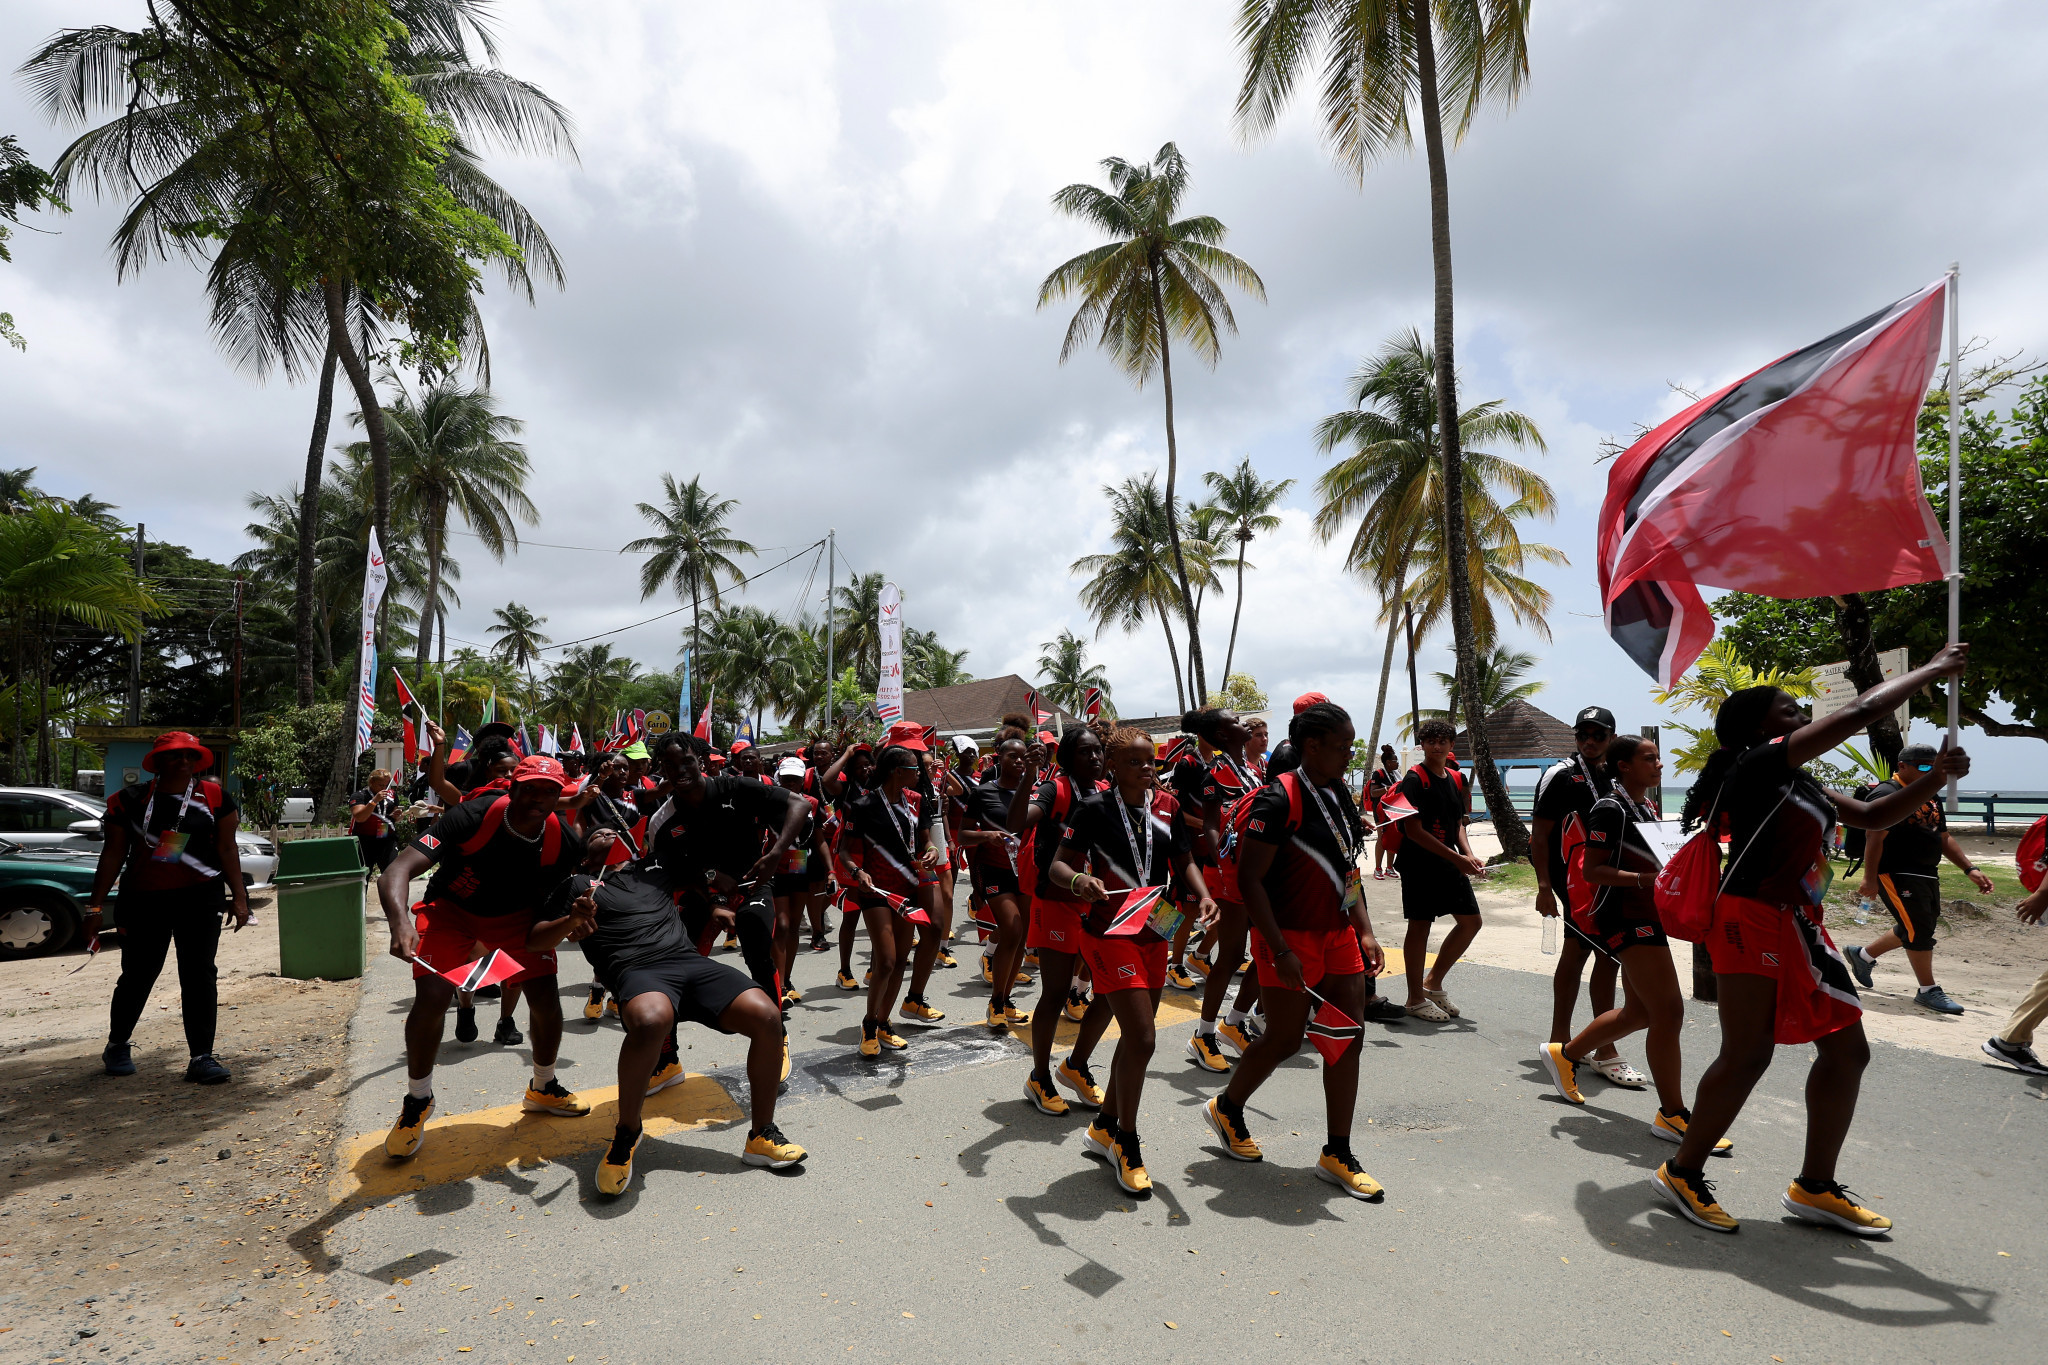 Hosts Trinidad and Tobago were the last nation in the parade of athletes along Pigeon Point Heritage Park ©Getty Images